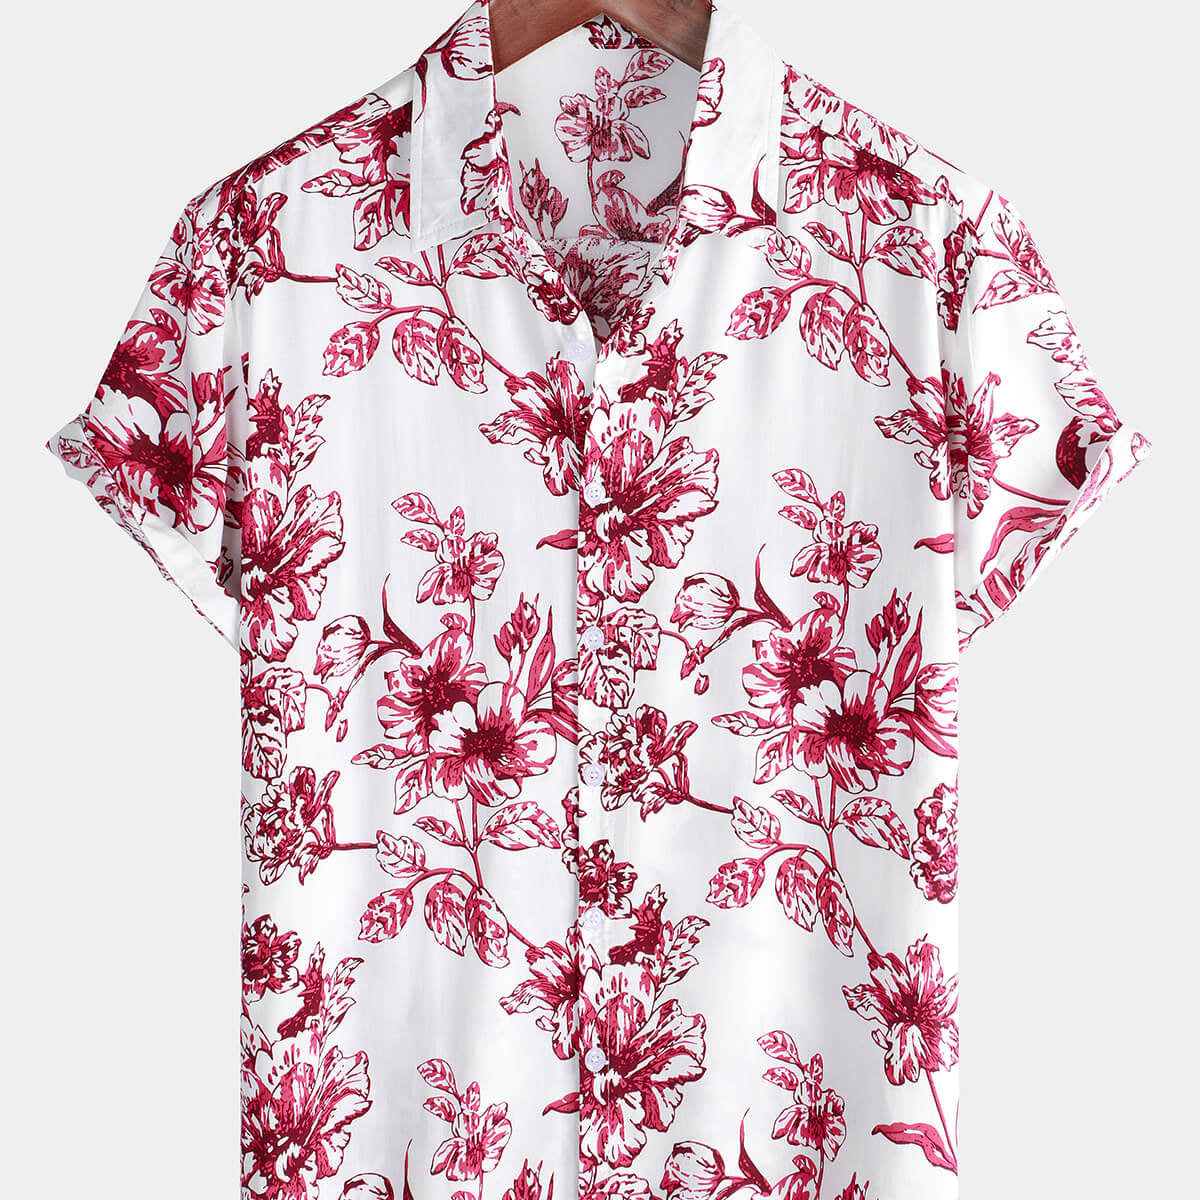 Men's Holiday Cotton Tropical Hawaiian Floral Button Up Red Short Sleeve Shirt